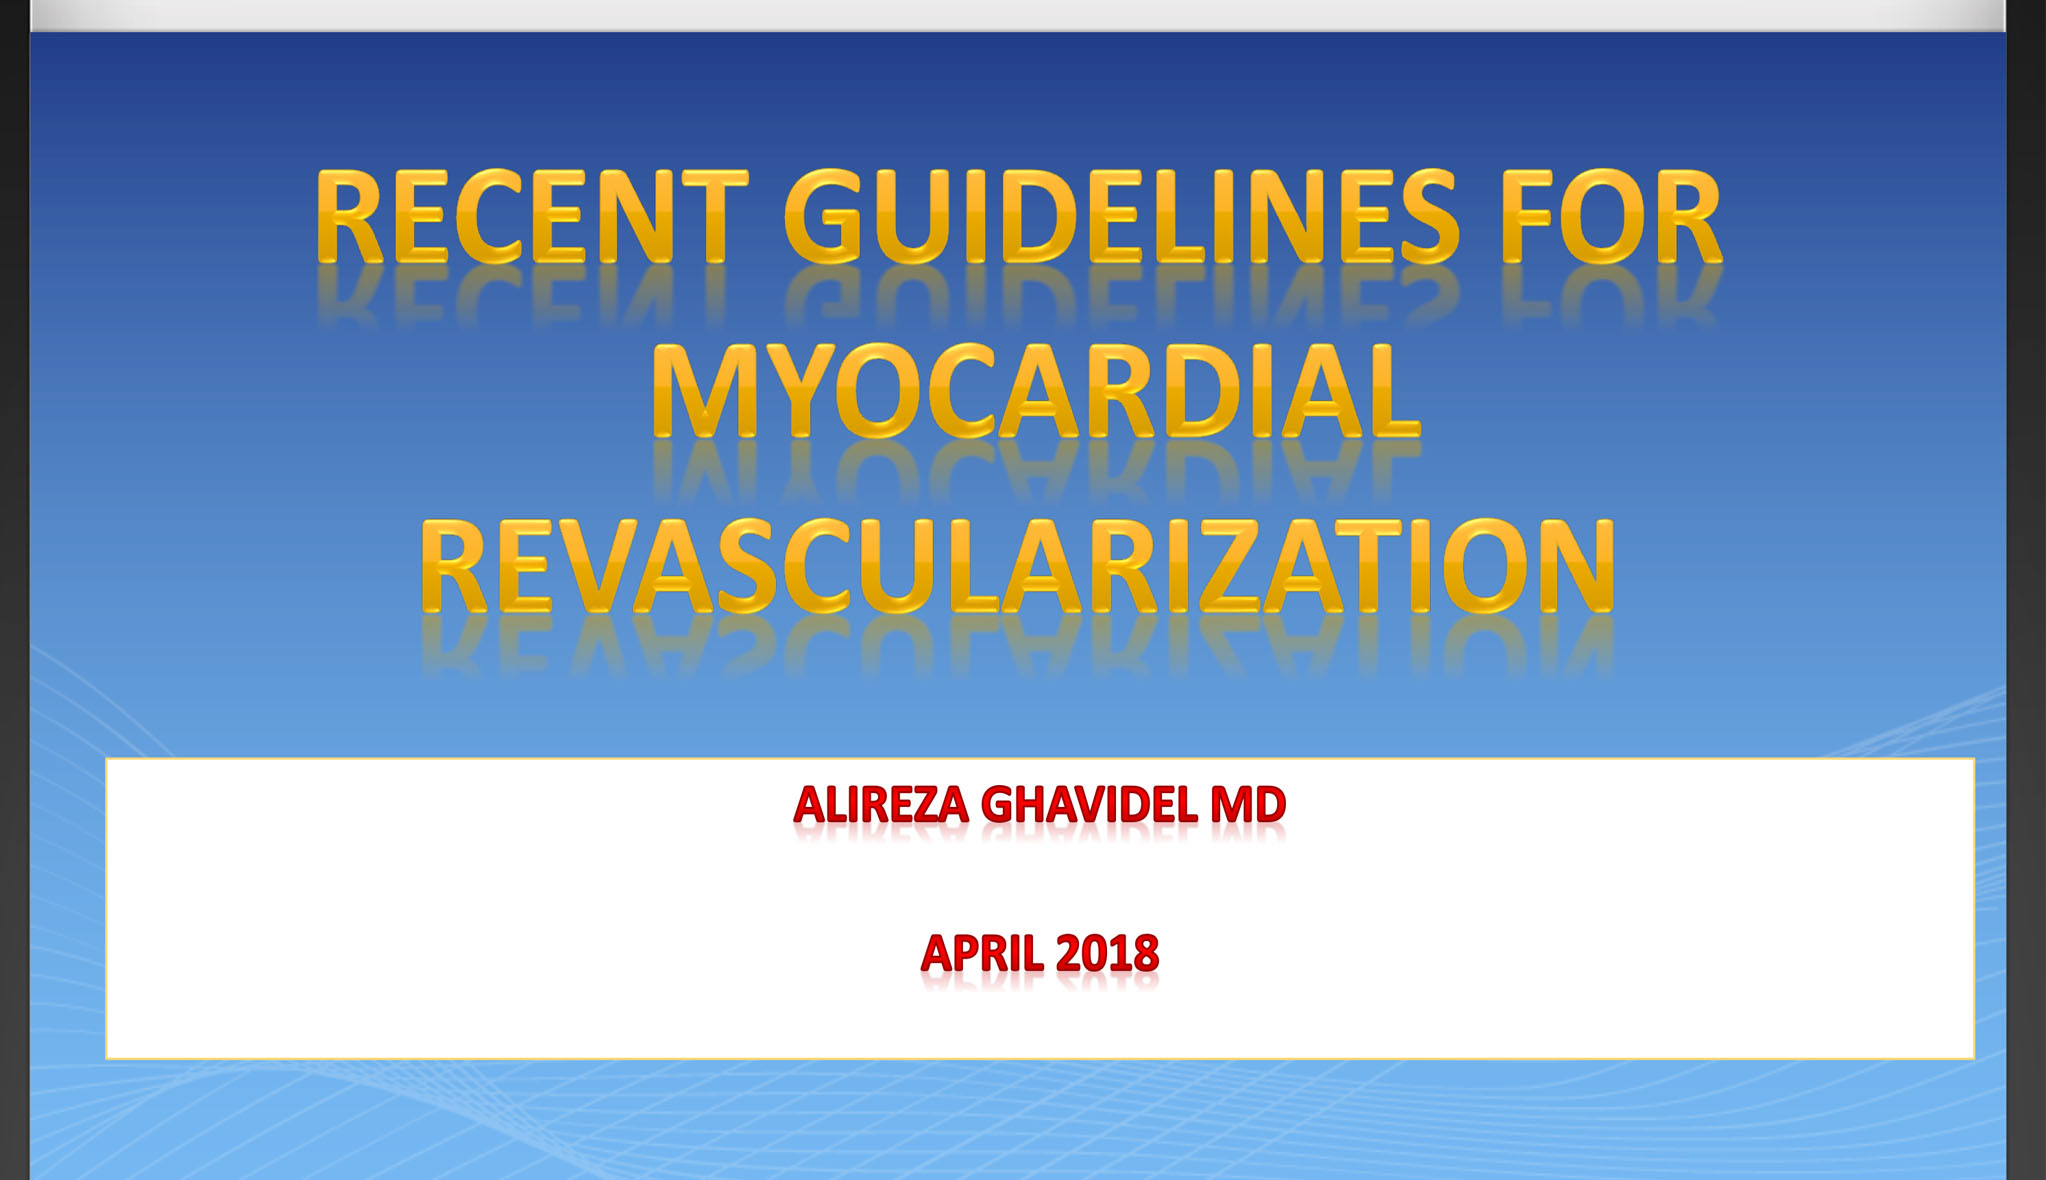 Recent Guidelines for Myocardial Revascularization